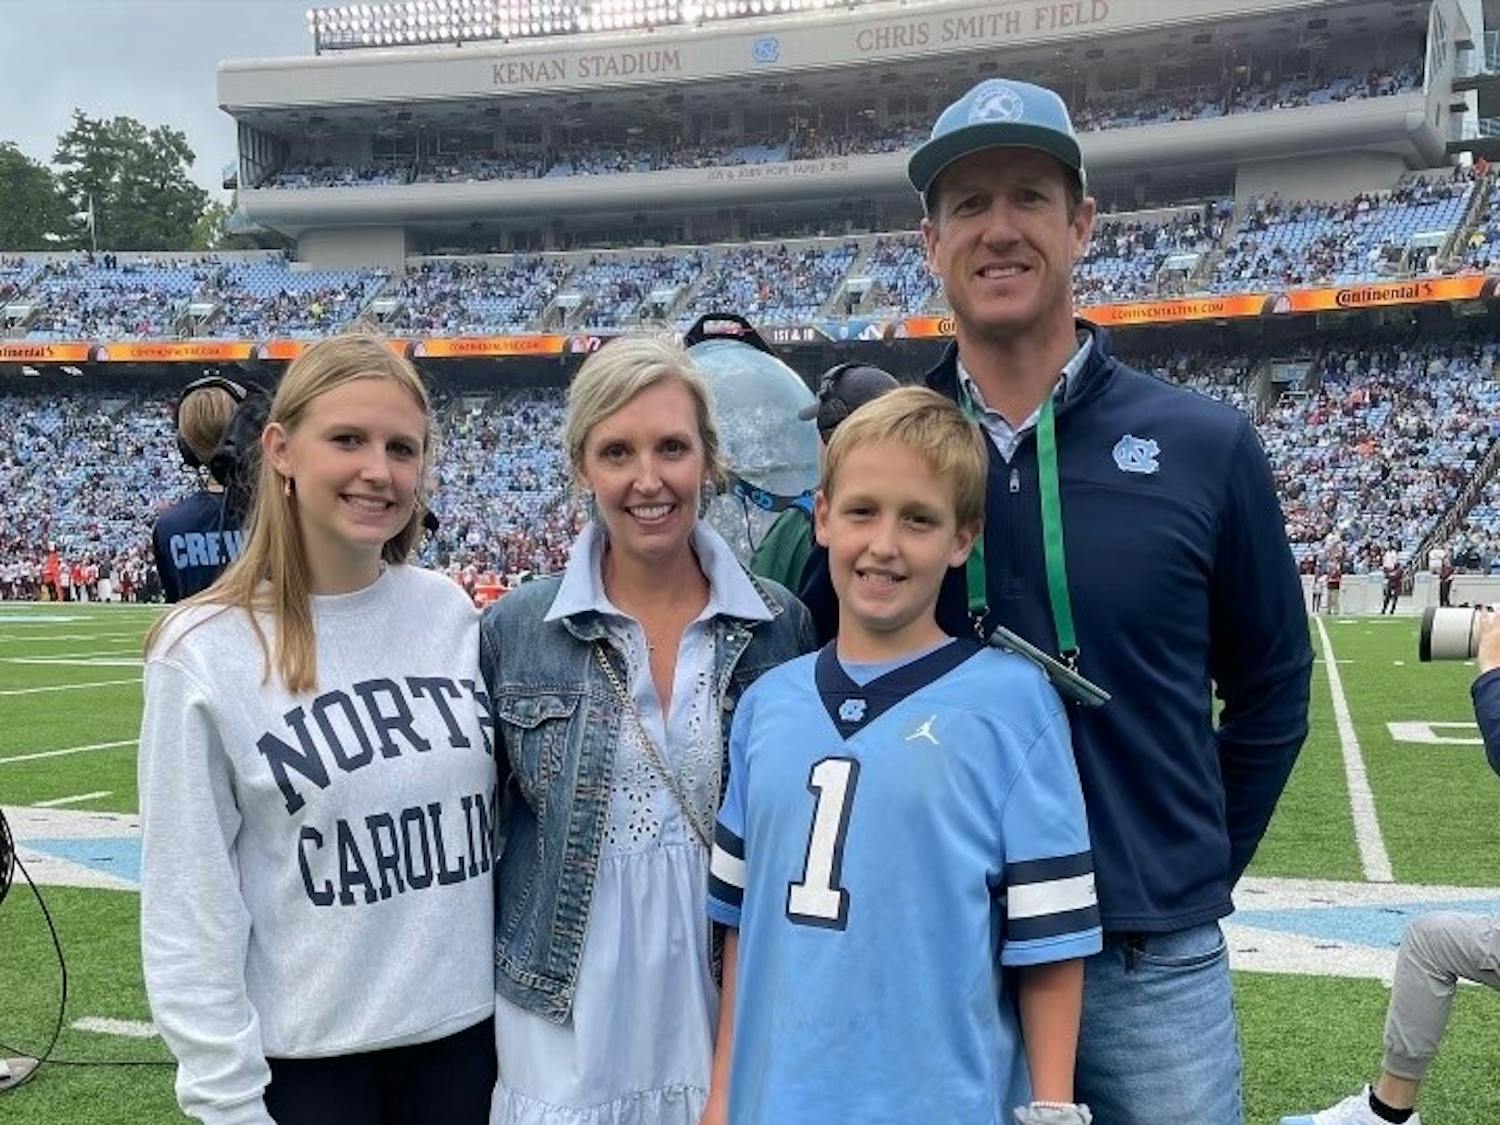 The Fitch family attended the Virginia Tech home football game on Oct. 1, 2022, where Lee Fitch (center) was the UNC Children’s Hospital, “kid champion” of the game. Pictured from left to right: Virginia Fitch, Meredith Fitch, Lee Fitch and David Fitch at Kenan Stadium. Photo by Jon Leggette and courtesy of The Finch Family.